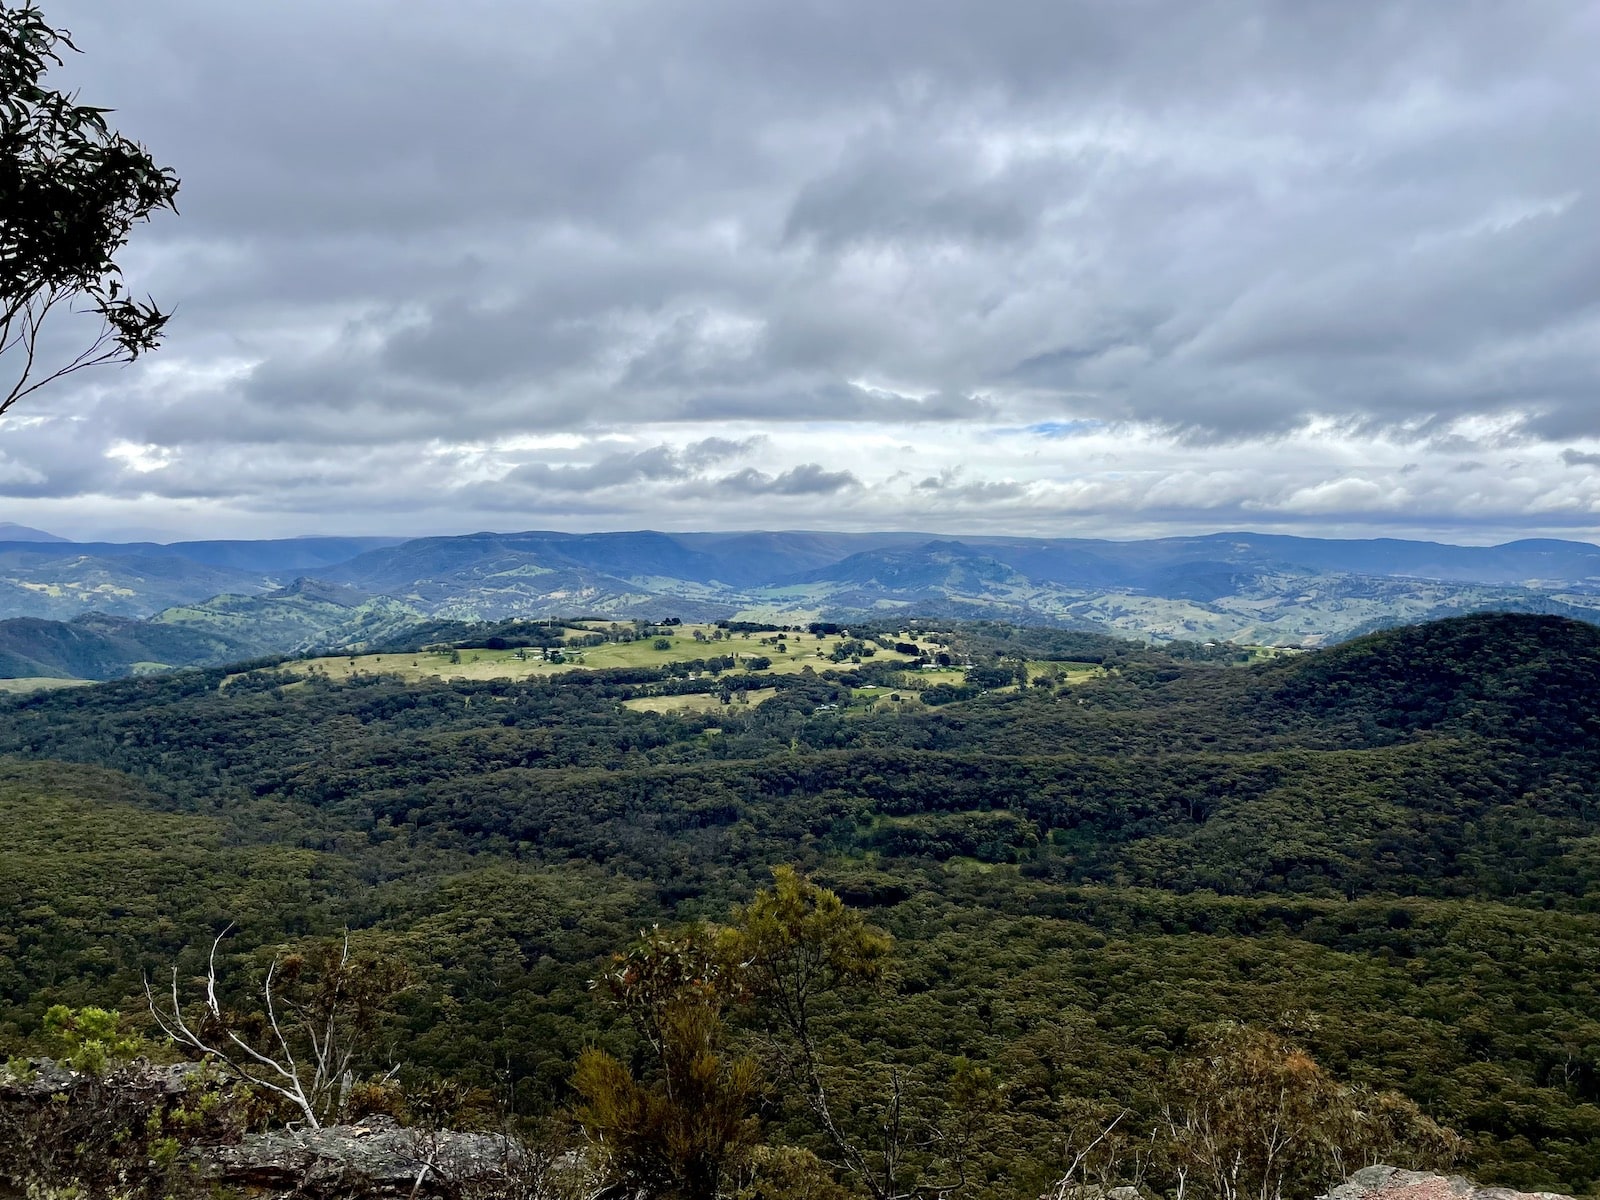 A view of some grassy valleys and many trees from a high vantage point. The sky is quite cloudy